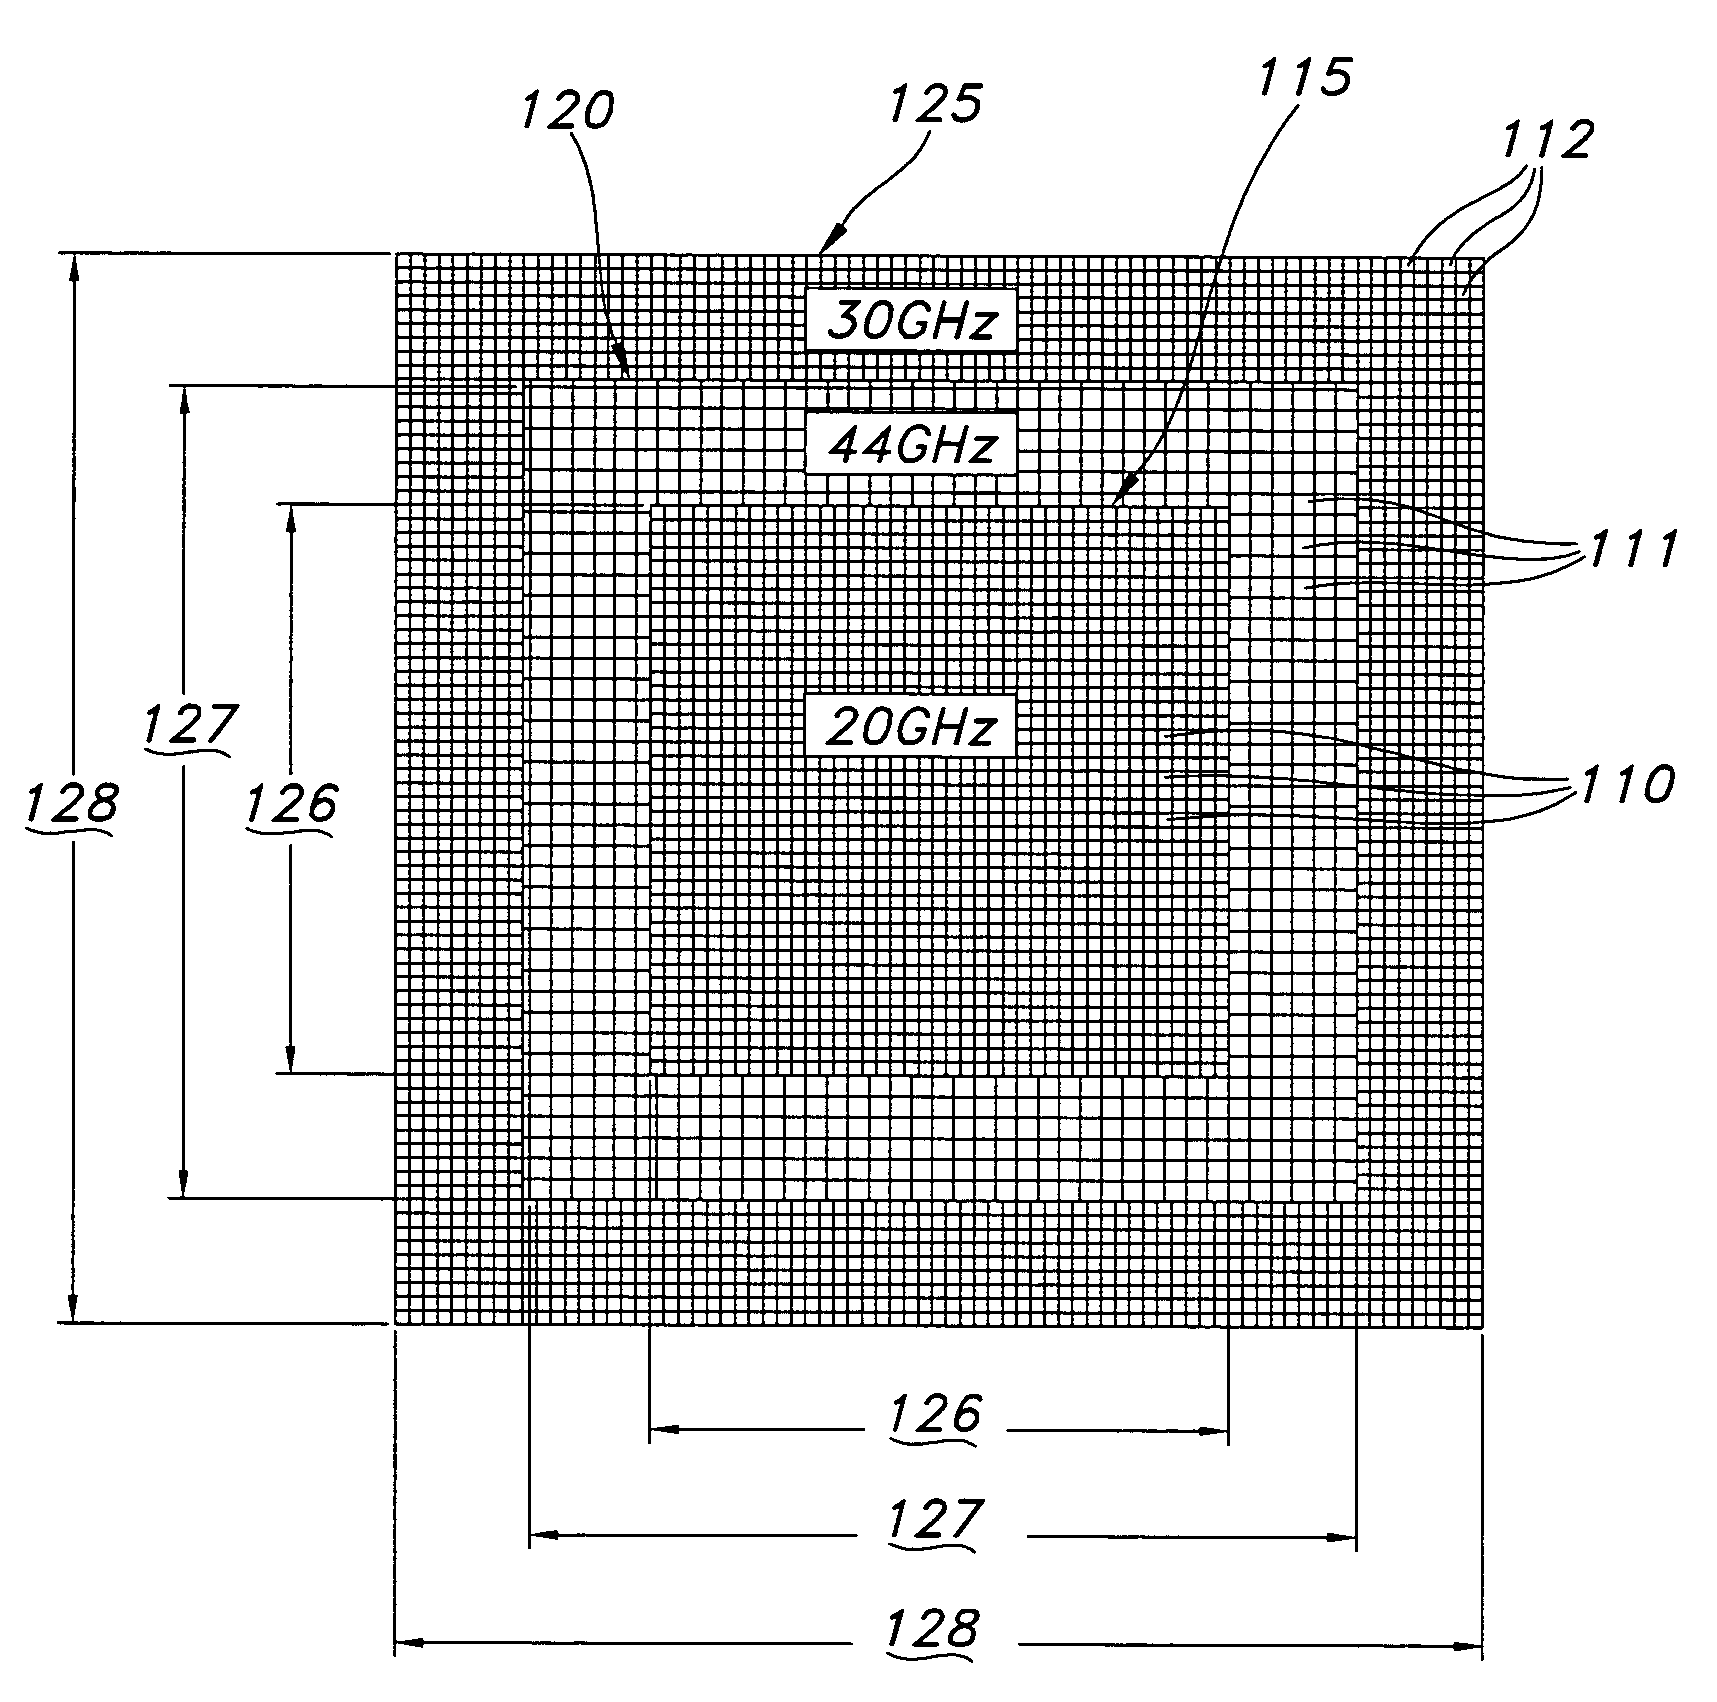 Multi-band wide-angle scan phased array antenna with novel grating lobe suppression